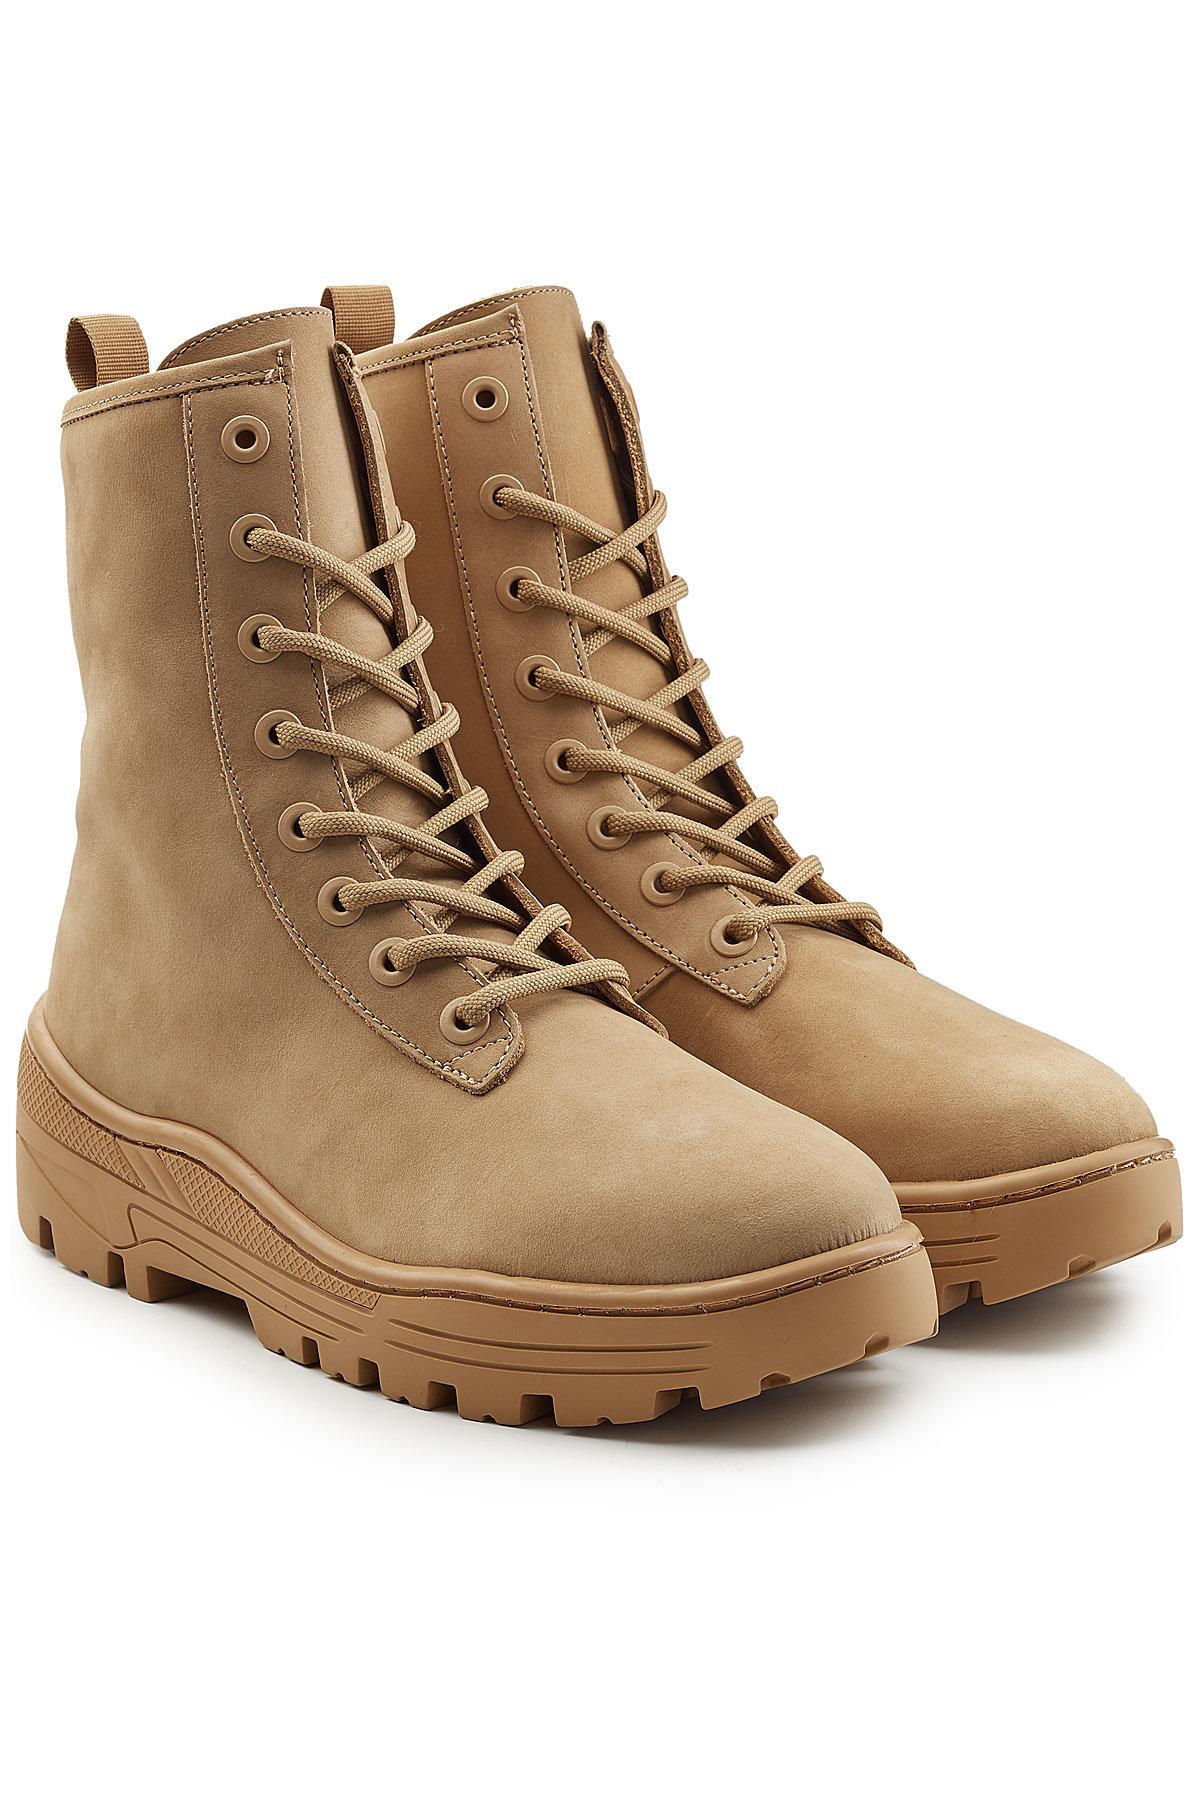 Lyst - Yeezy Nubuck Military Boots in Natural for Men